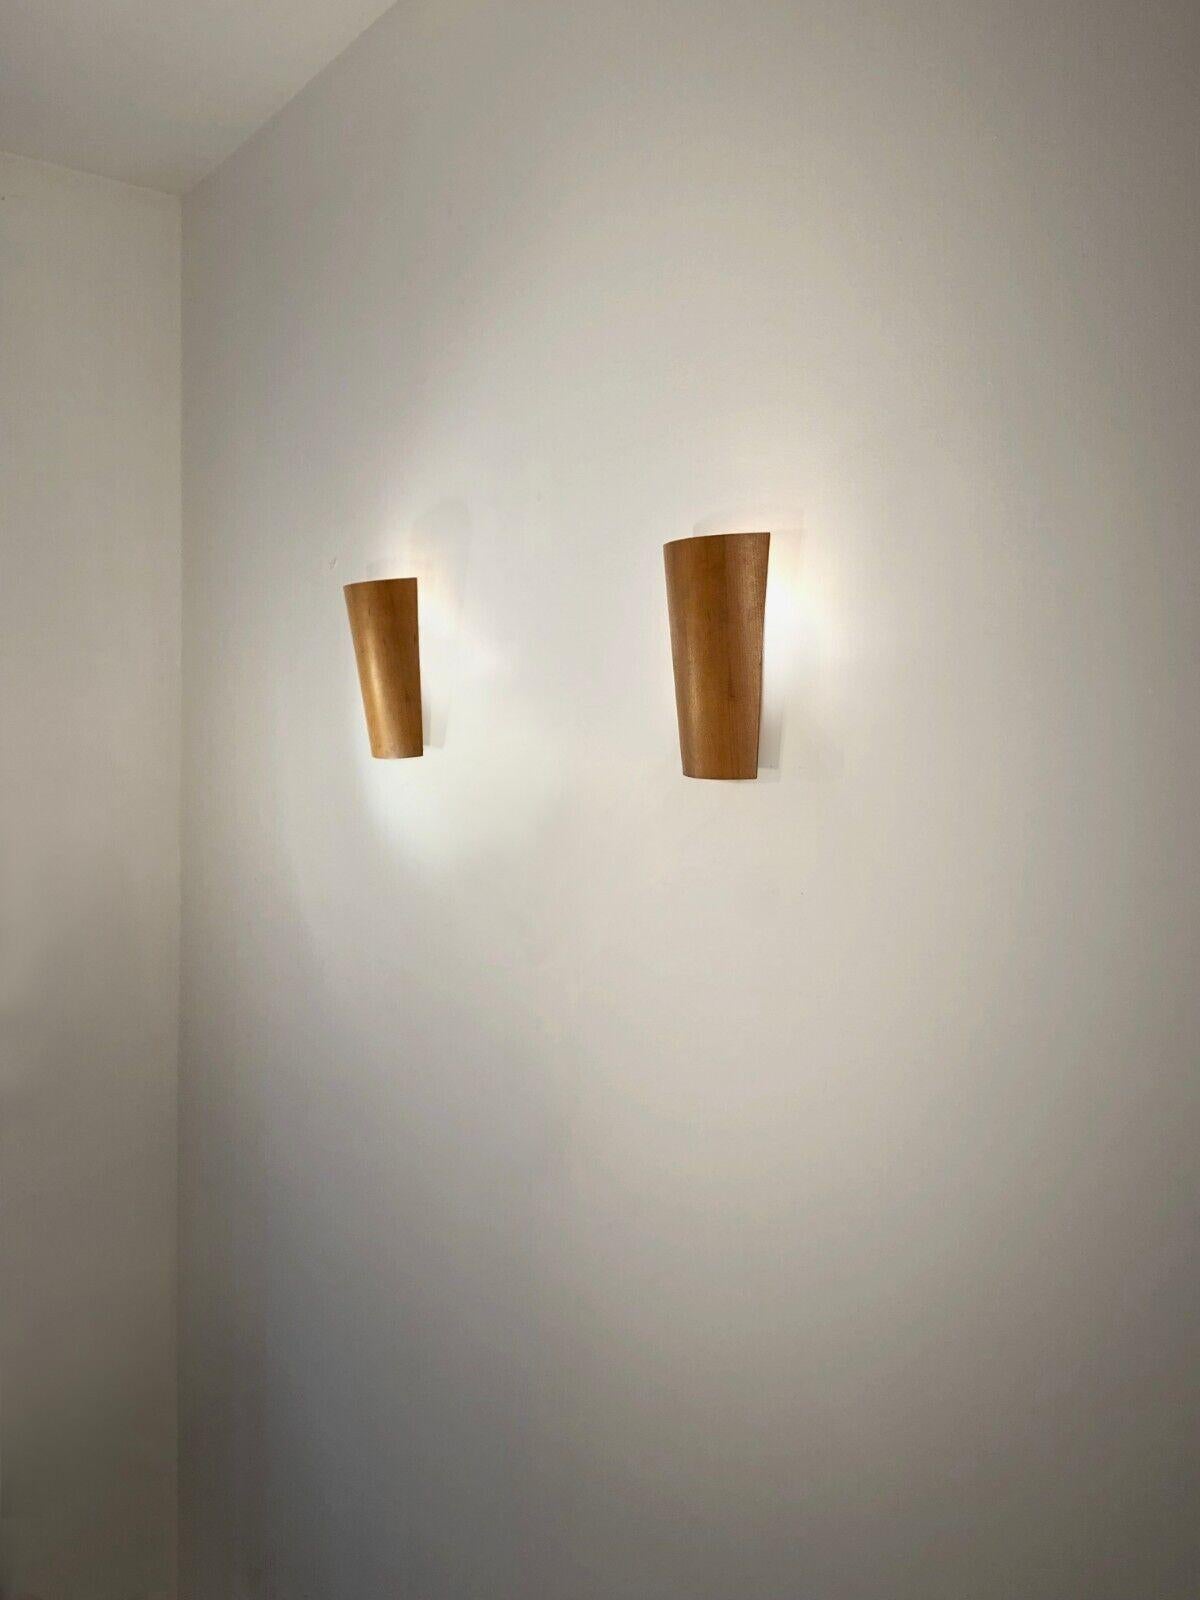 An elegant and simple, post-modern and minimalist pair of warm wall lights, Post-Modernist, Minimalist, Constructivist, Nineties, composed of 2 curved light wood shutters diffusing the light towards the wall, mounted on discreet wall bases in metal,